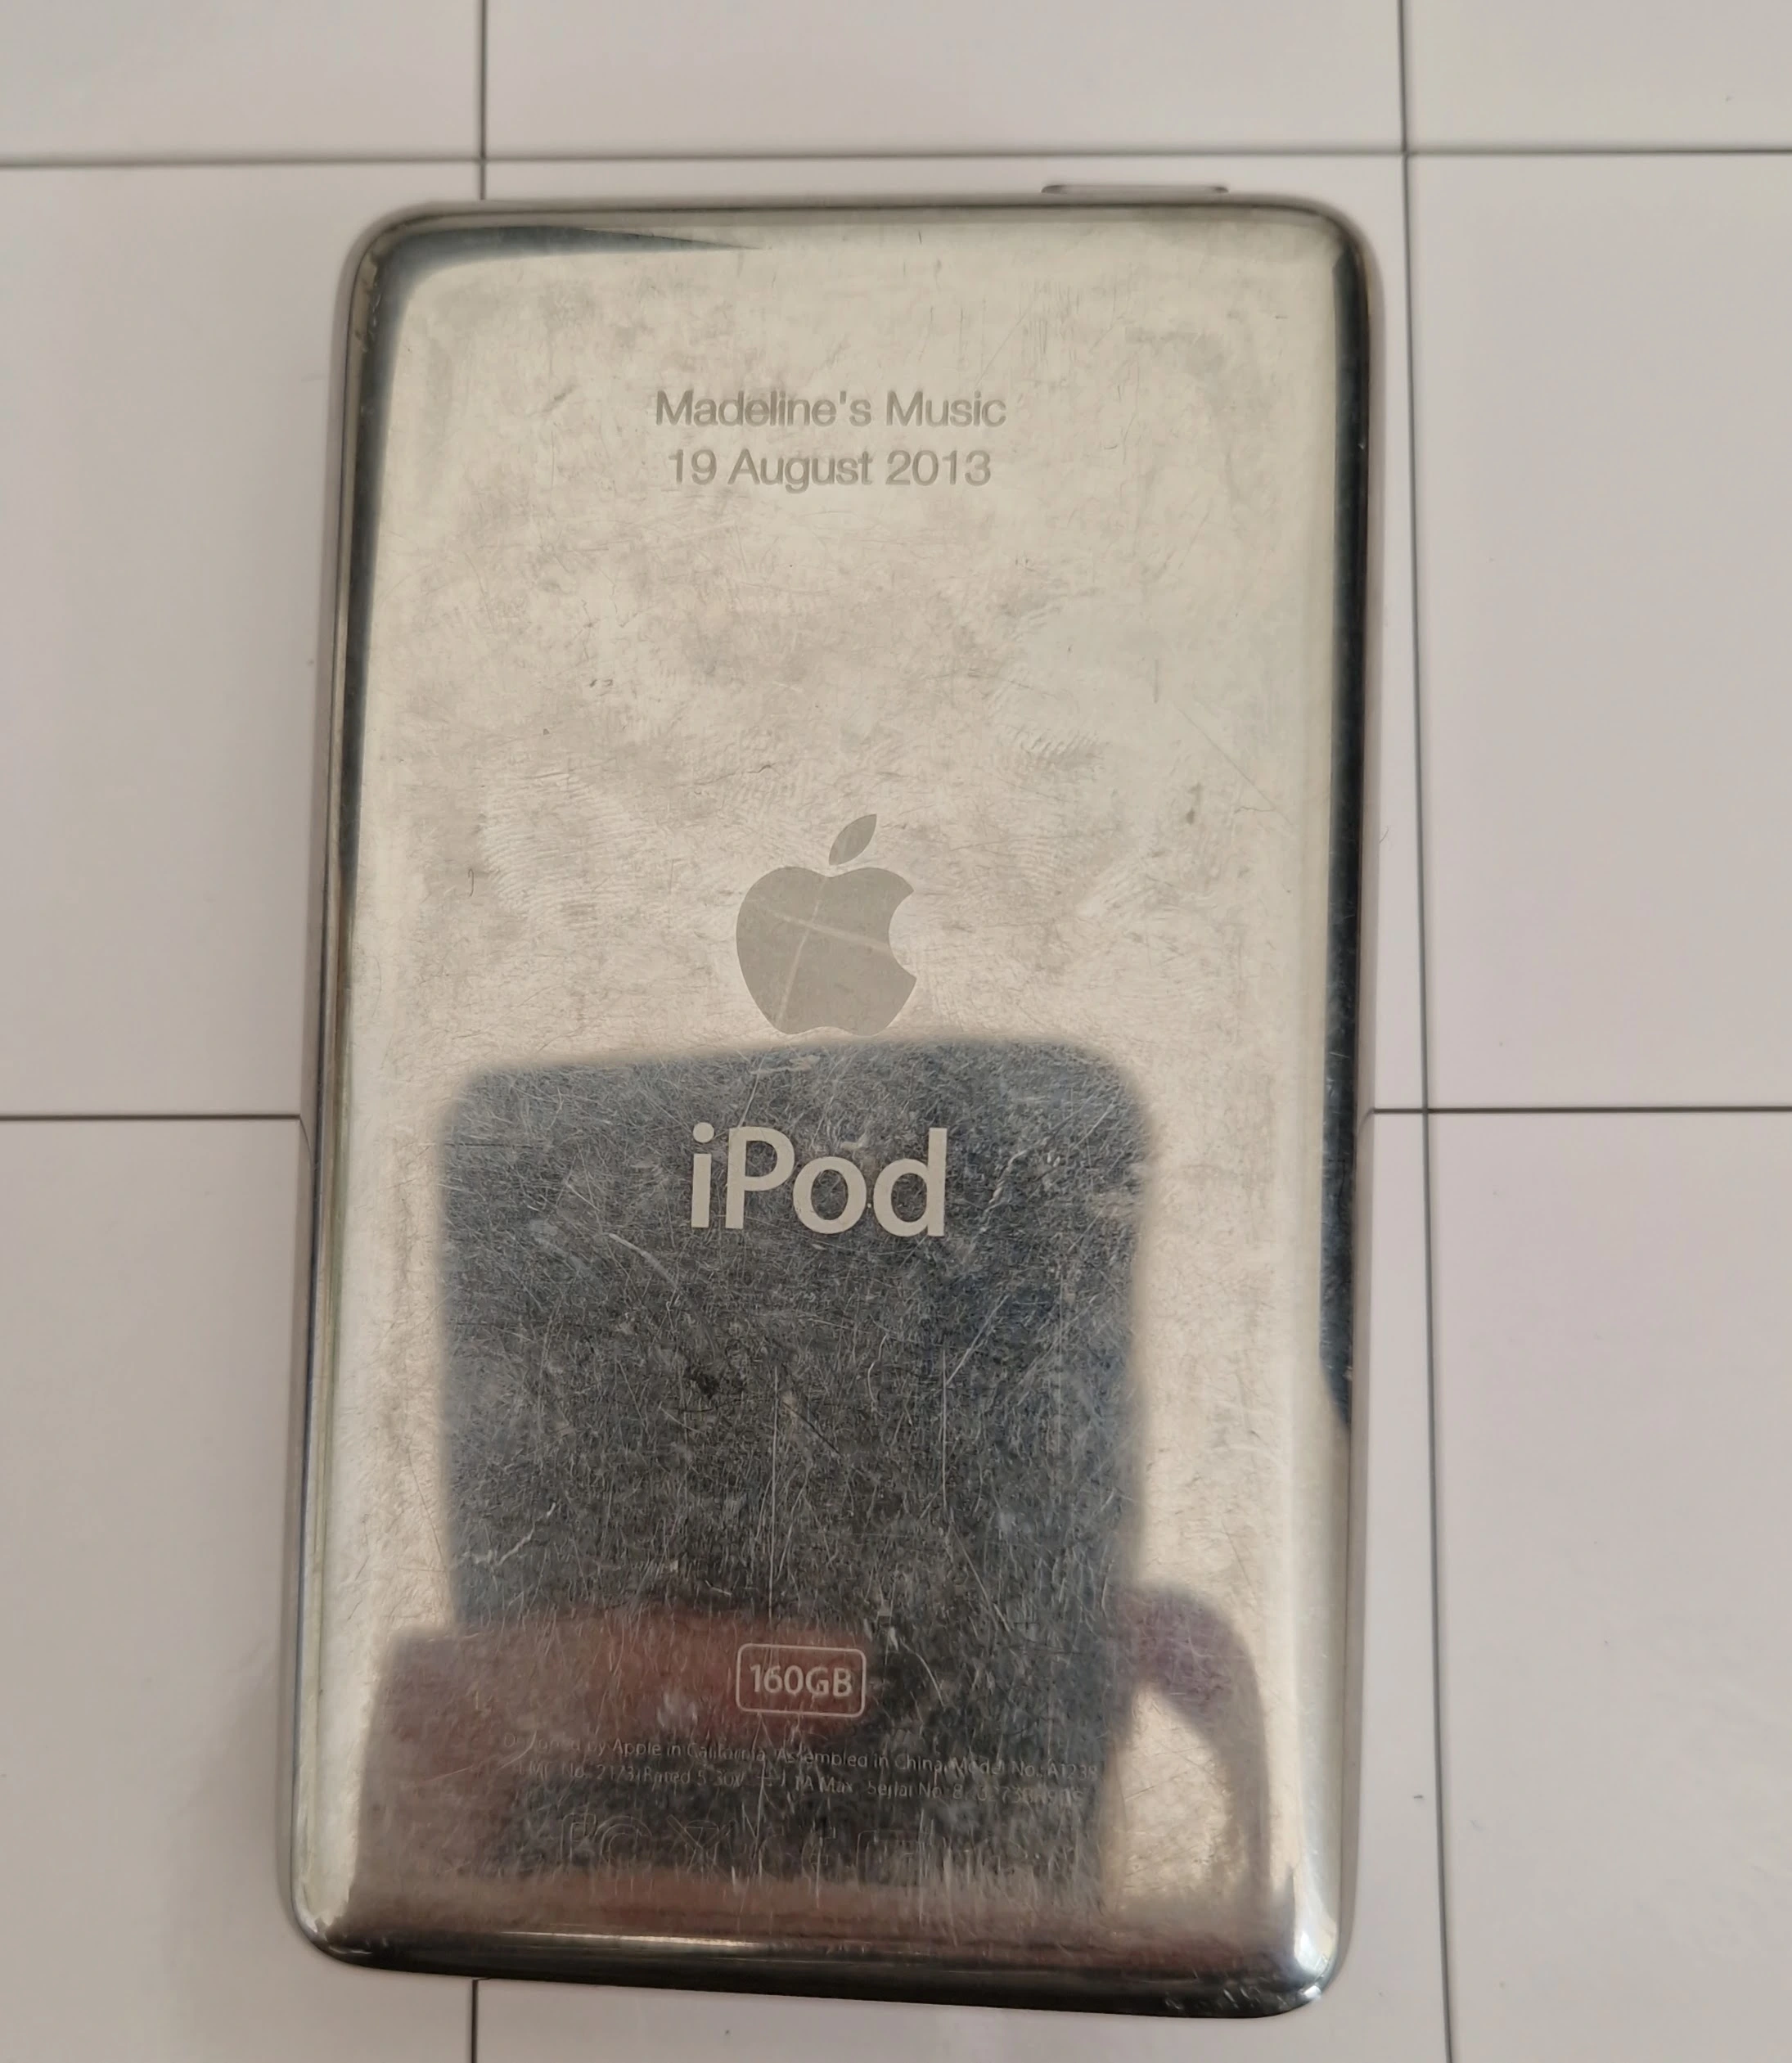 Back of the iPod